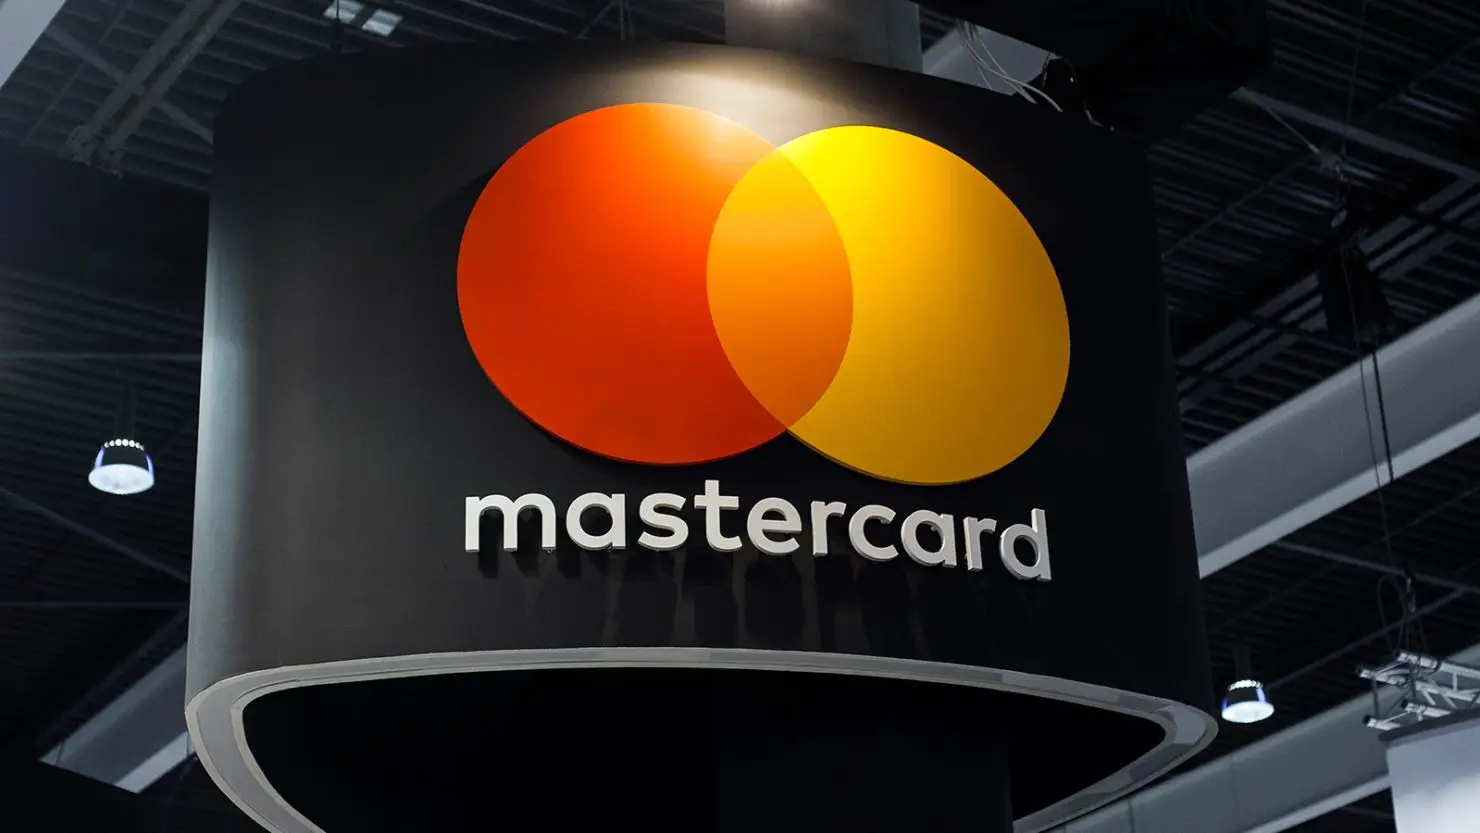 who are Mastercard's joint venture partners?